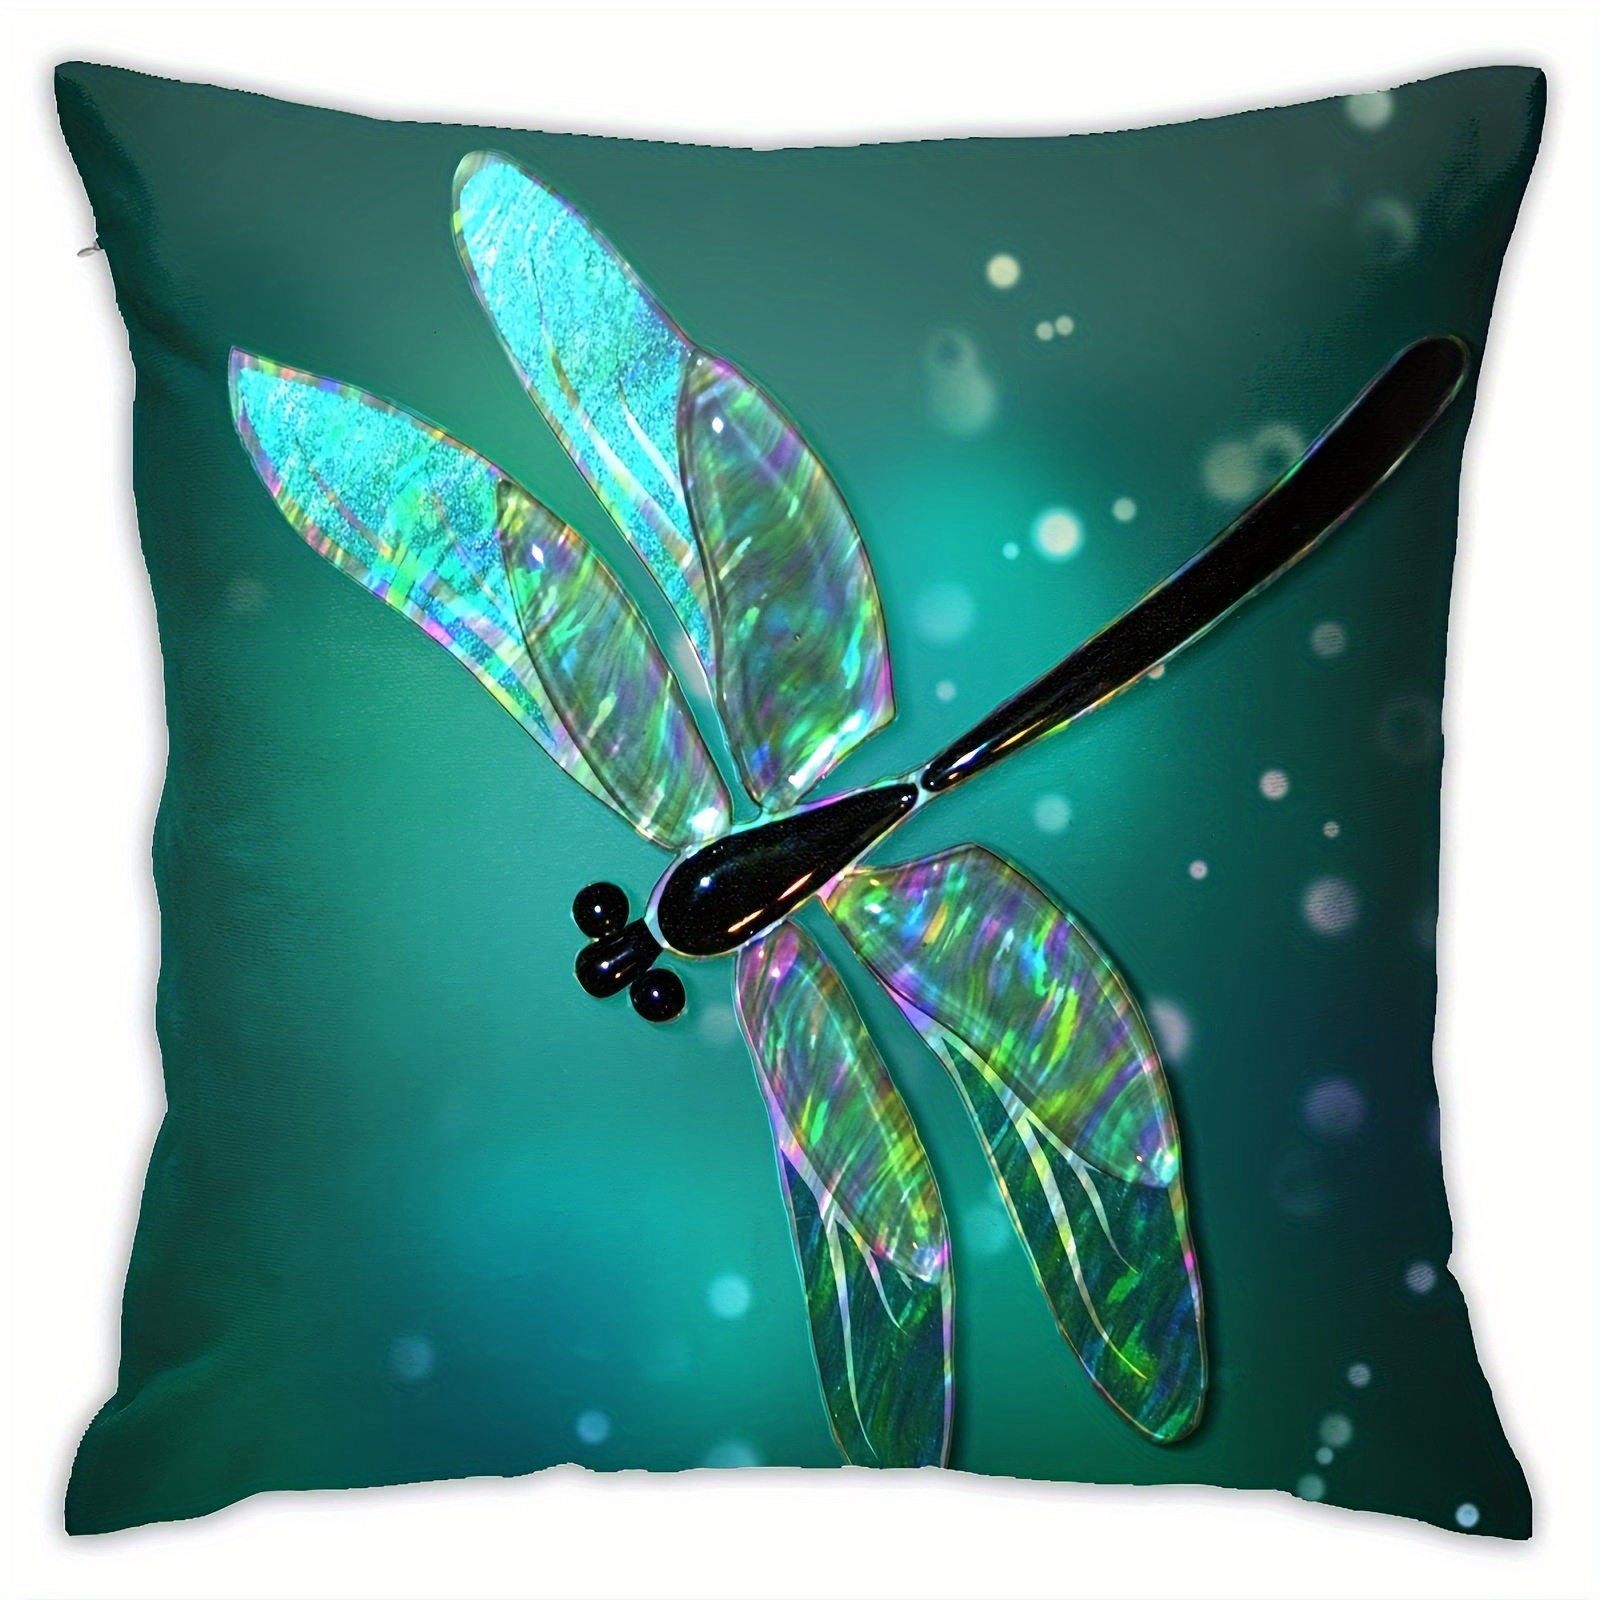 

1pc Fantasy Green Dragonfly Throw Pillow Covers Decorative Square Pillowcase Cushion Covers For Sofa Couch Living Room Bedroom 18x18 Inch,(short Plush Decor 18x18 Inch Without Pillow Core)